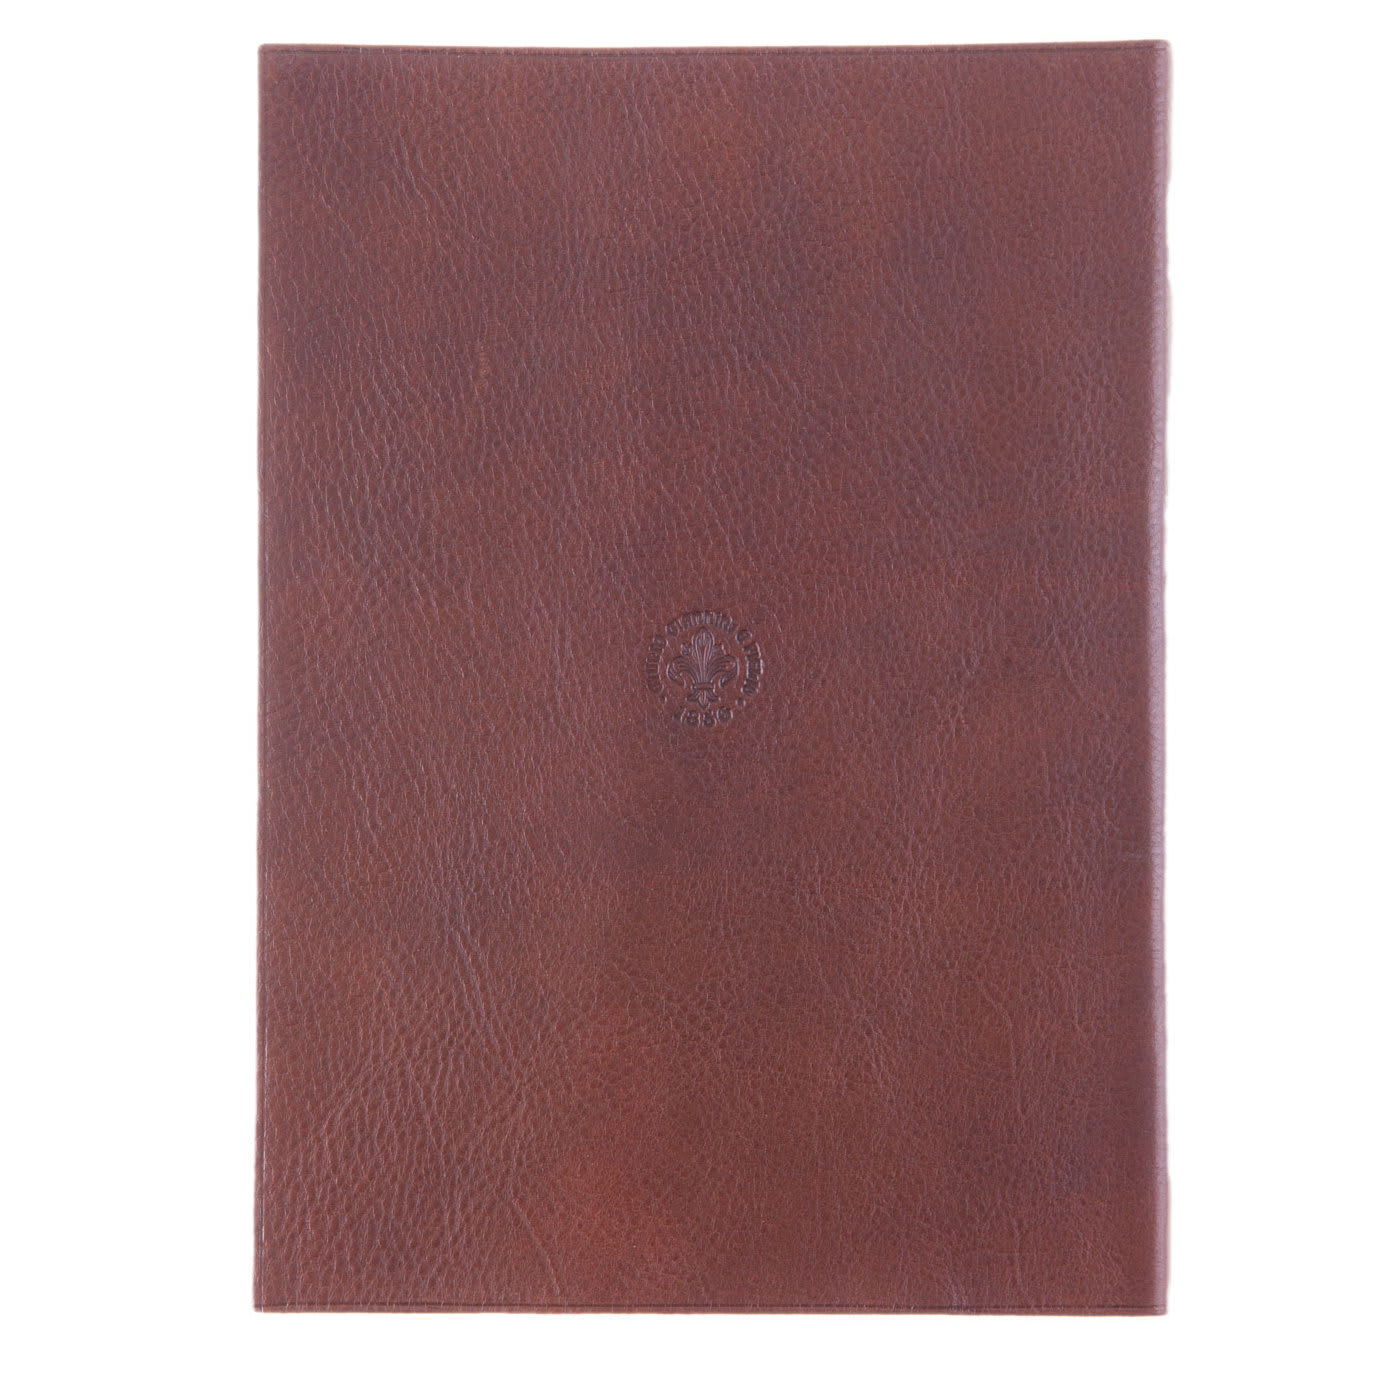 Brown Leather Notebook - Giannini